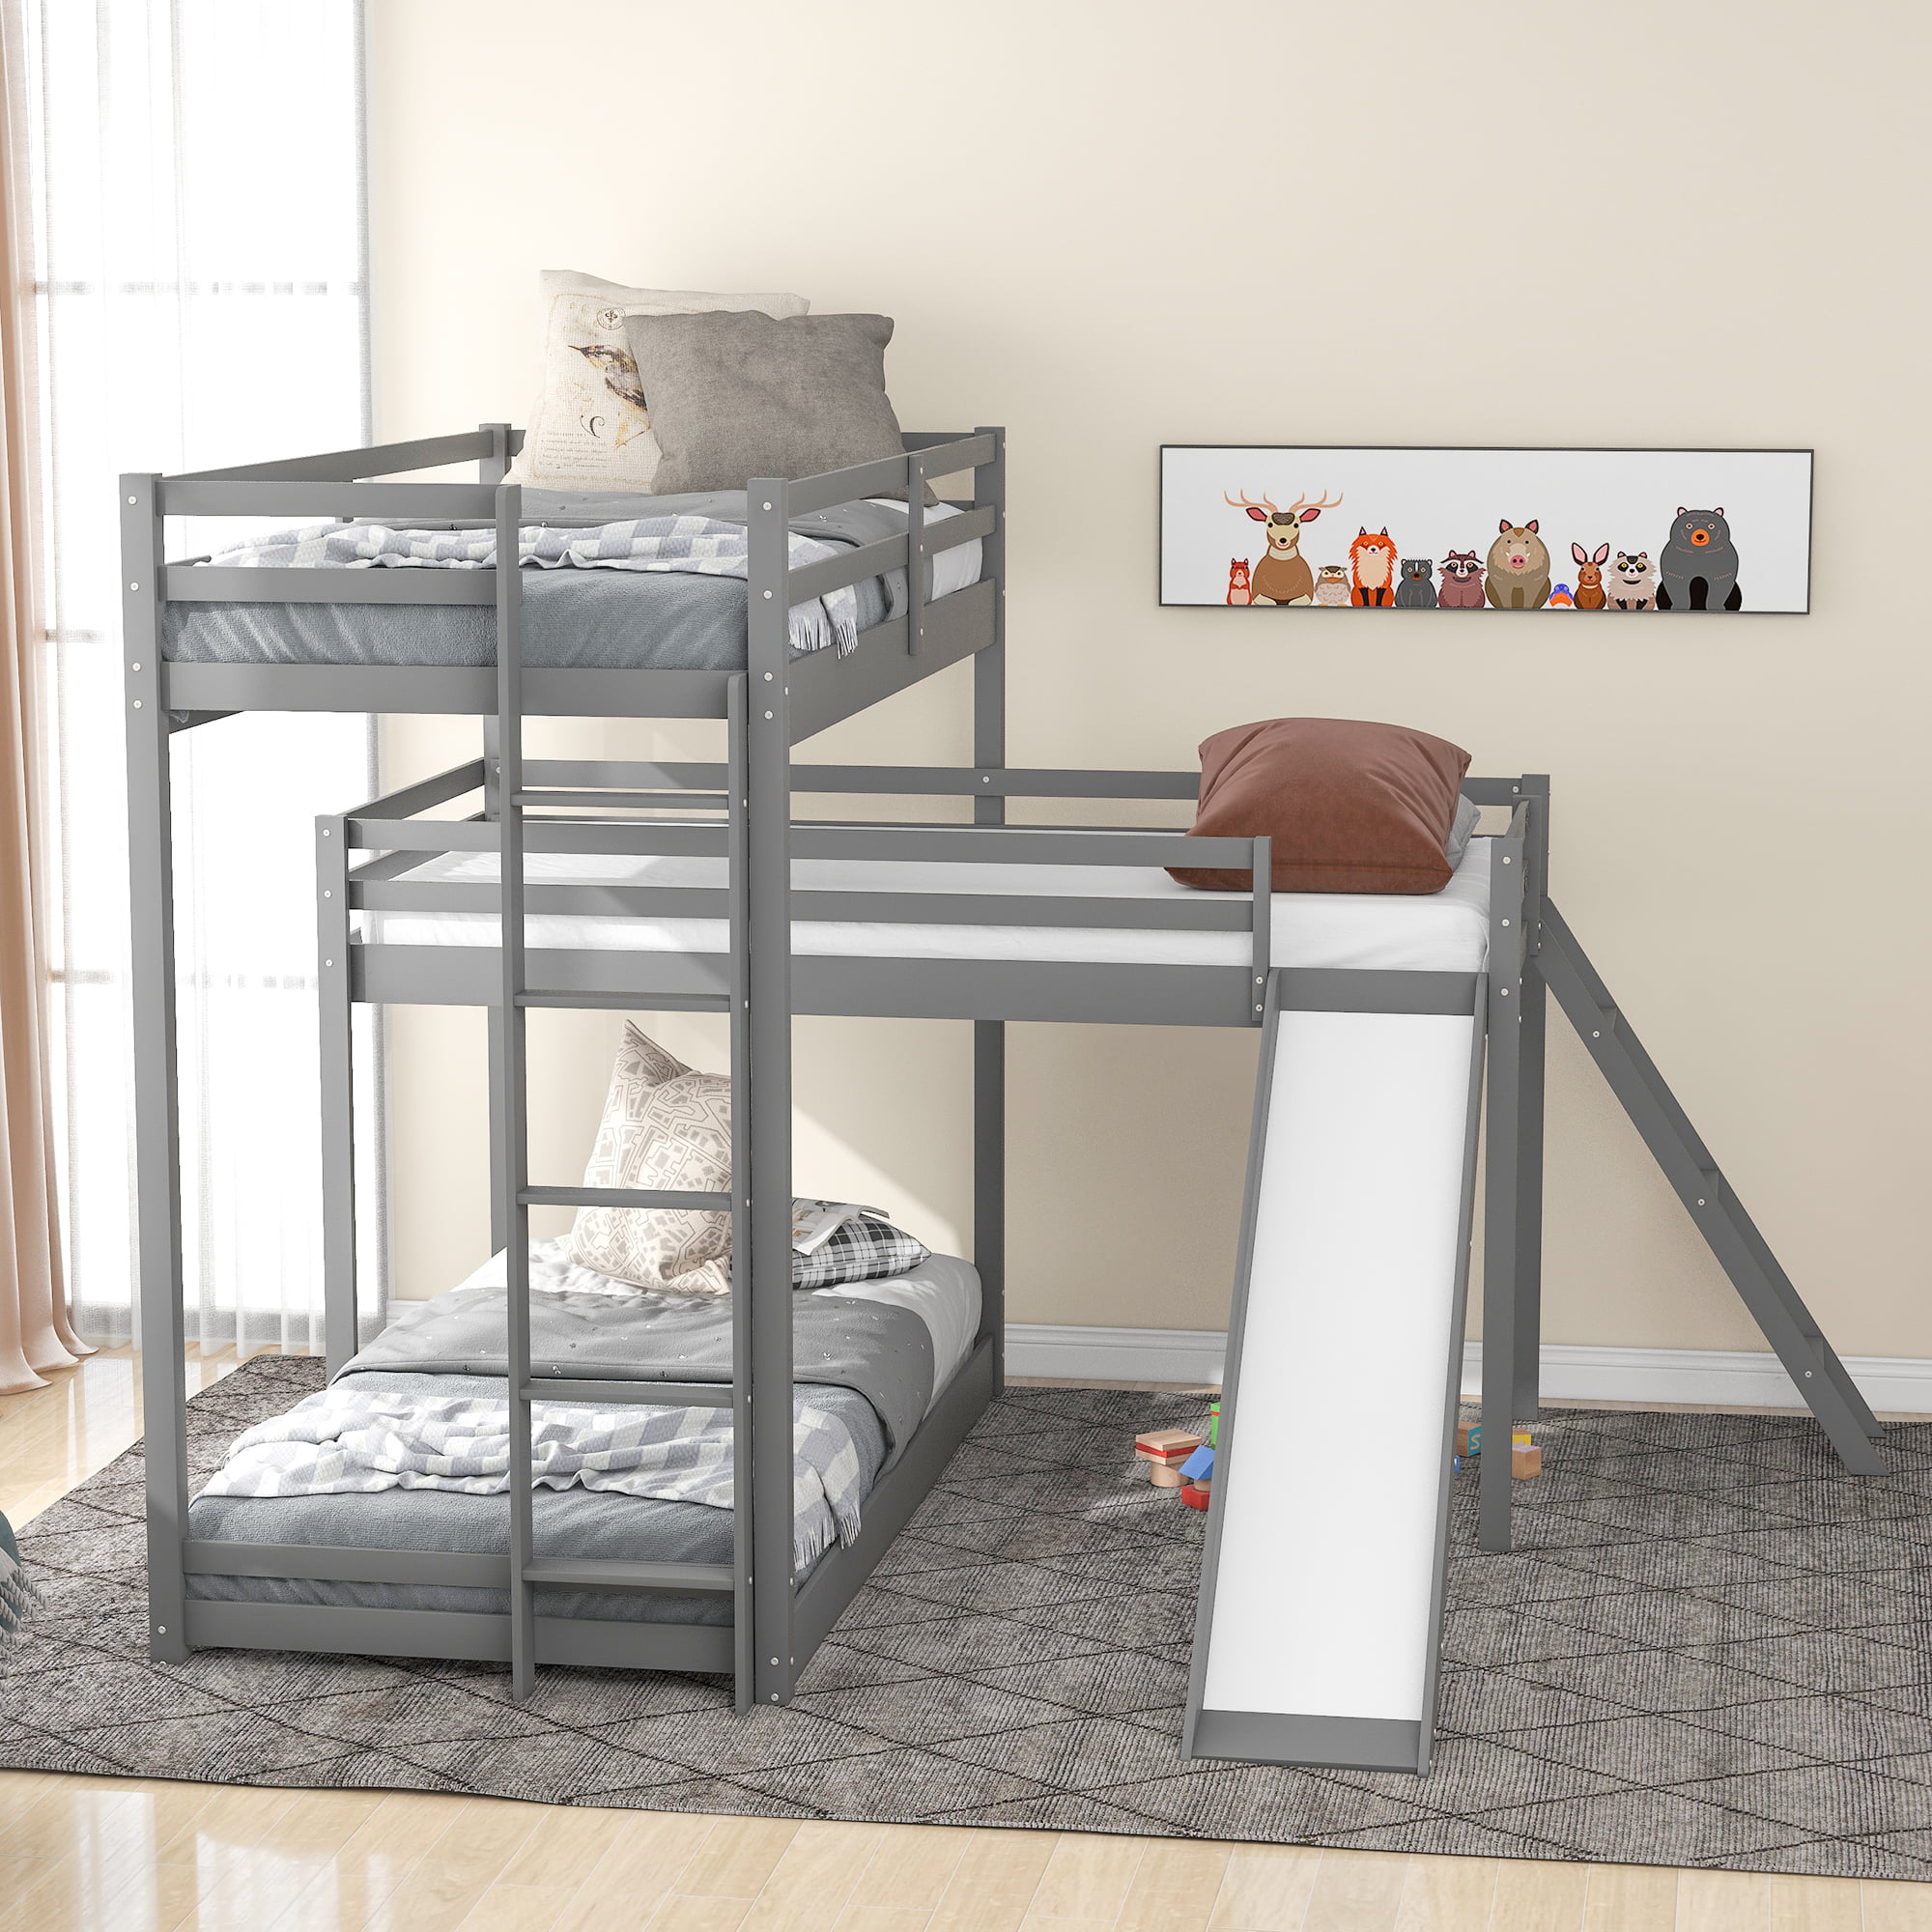 Sesslife Kids Bunk Beds For Small Rooms, L Shaped 3 Bunk Beds